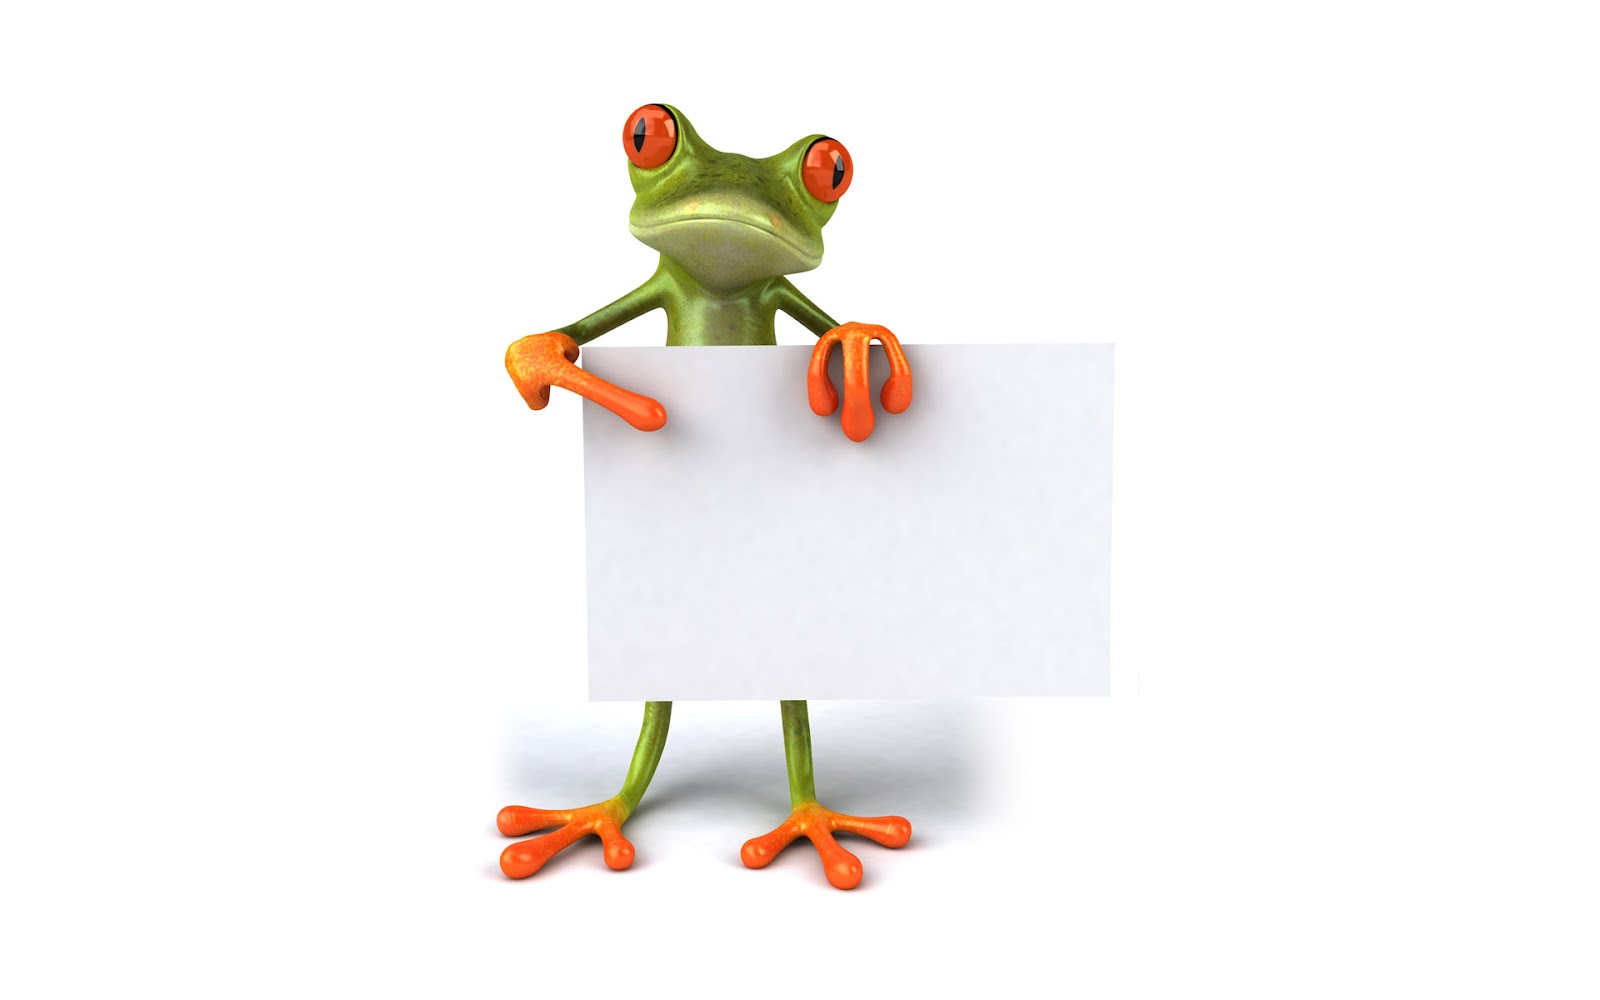  frog points to a paper 3D wallpaper free download wallpapers